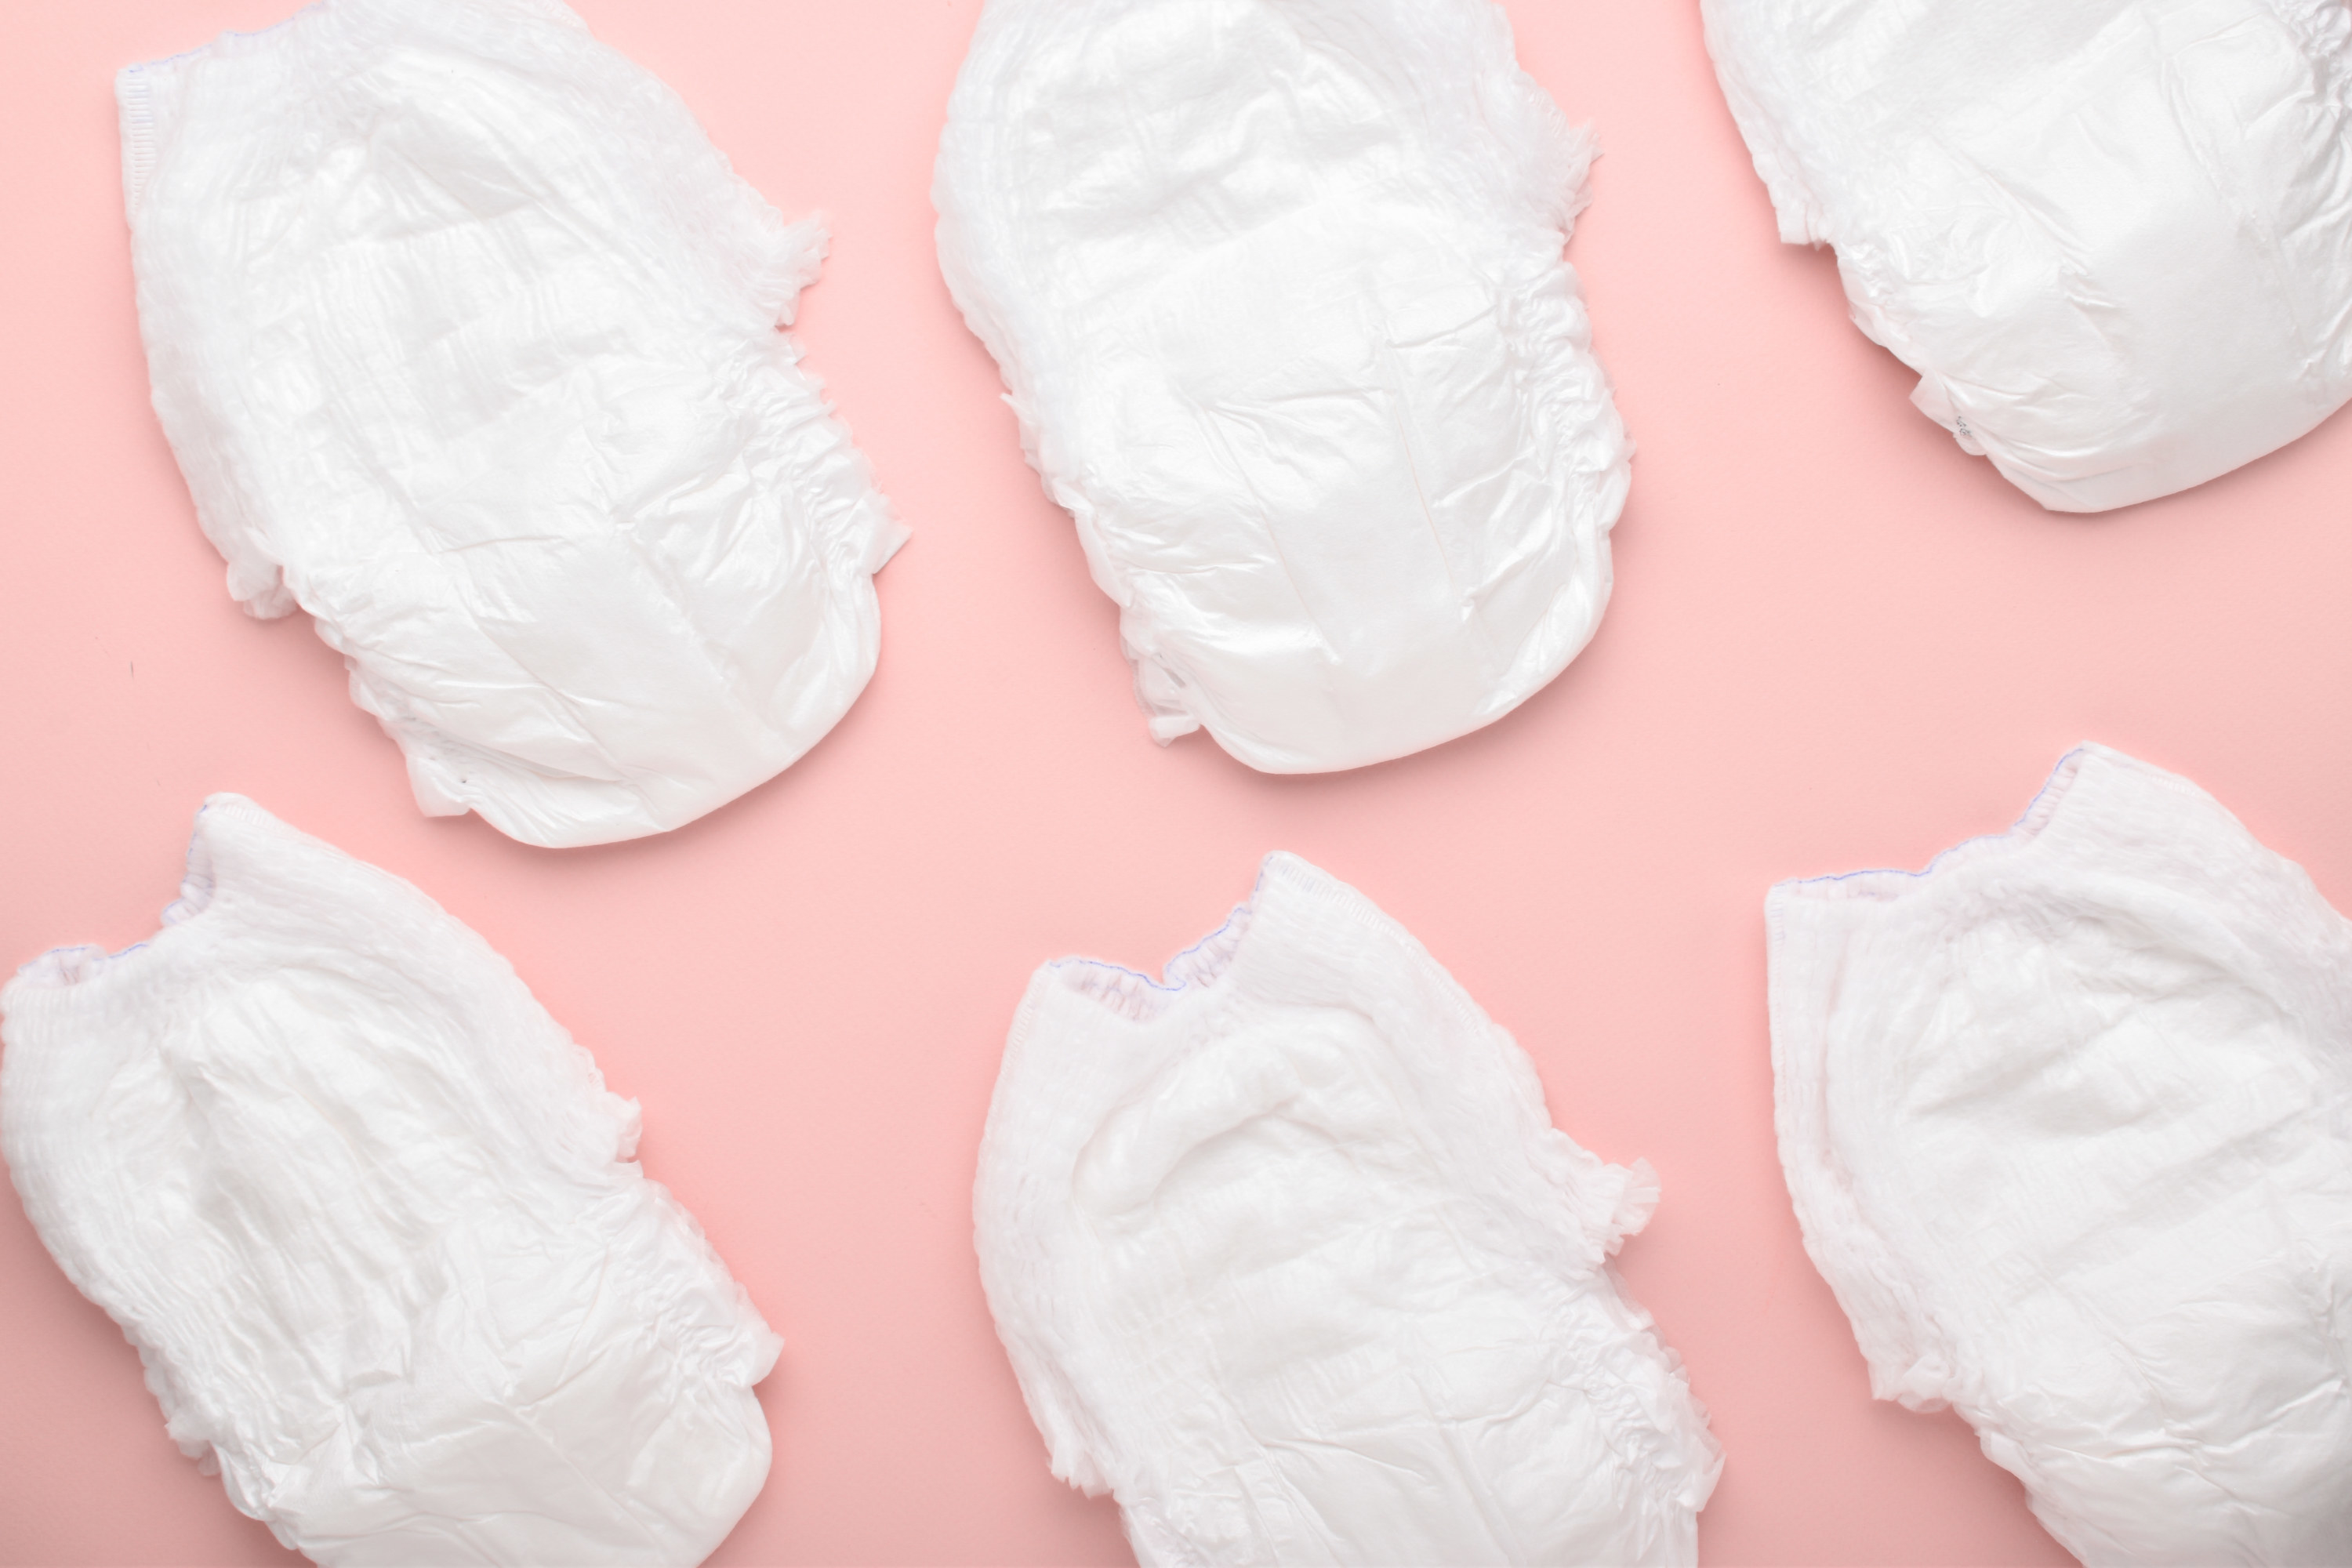 Background of diapers on a pink background